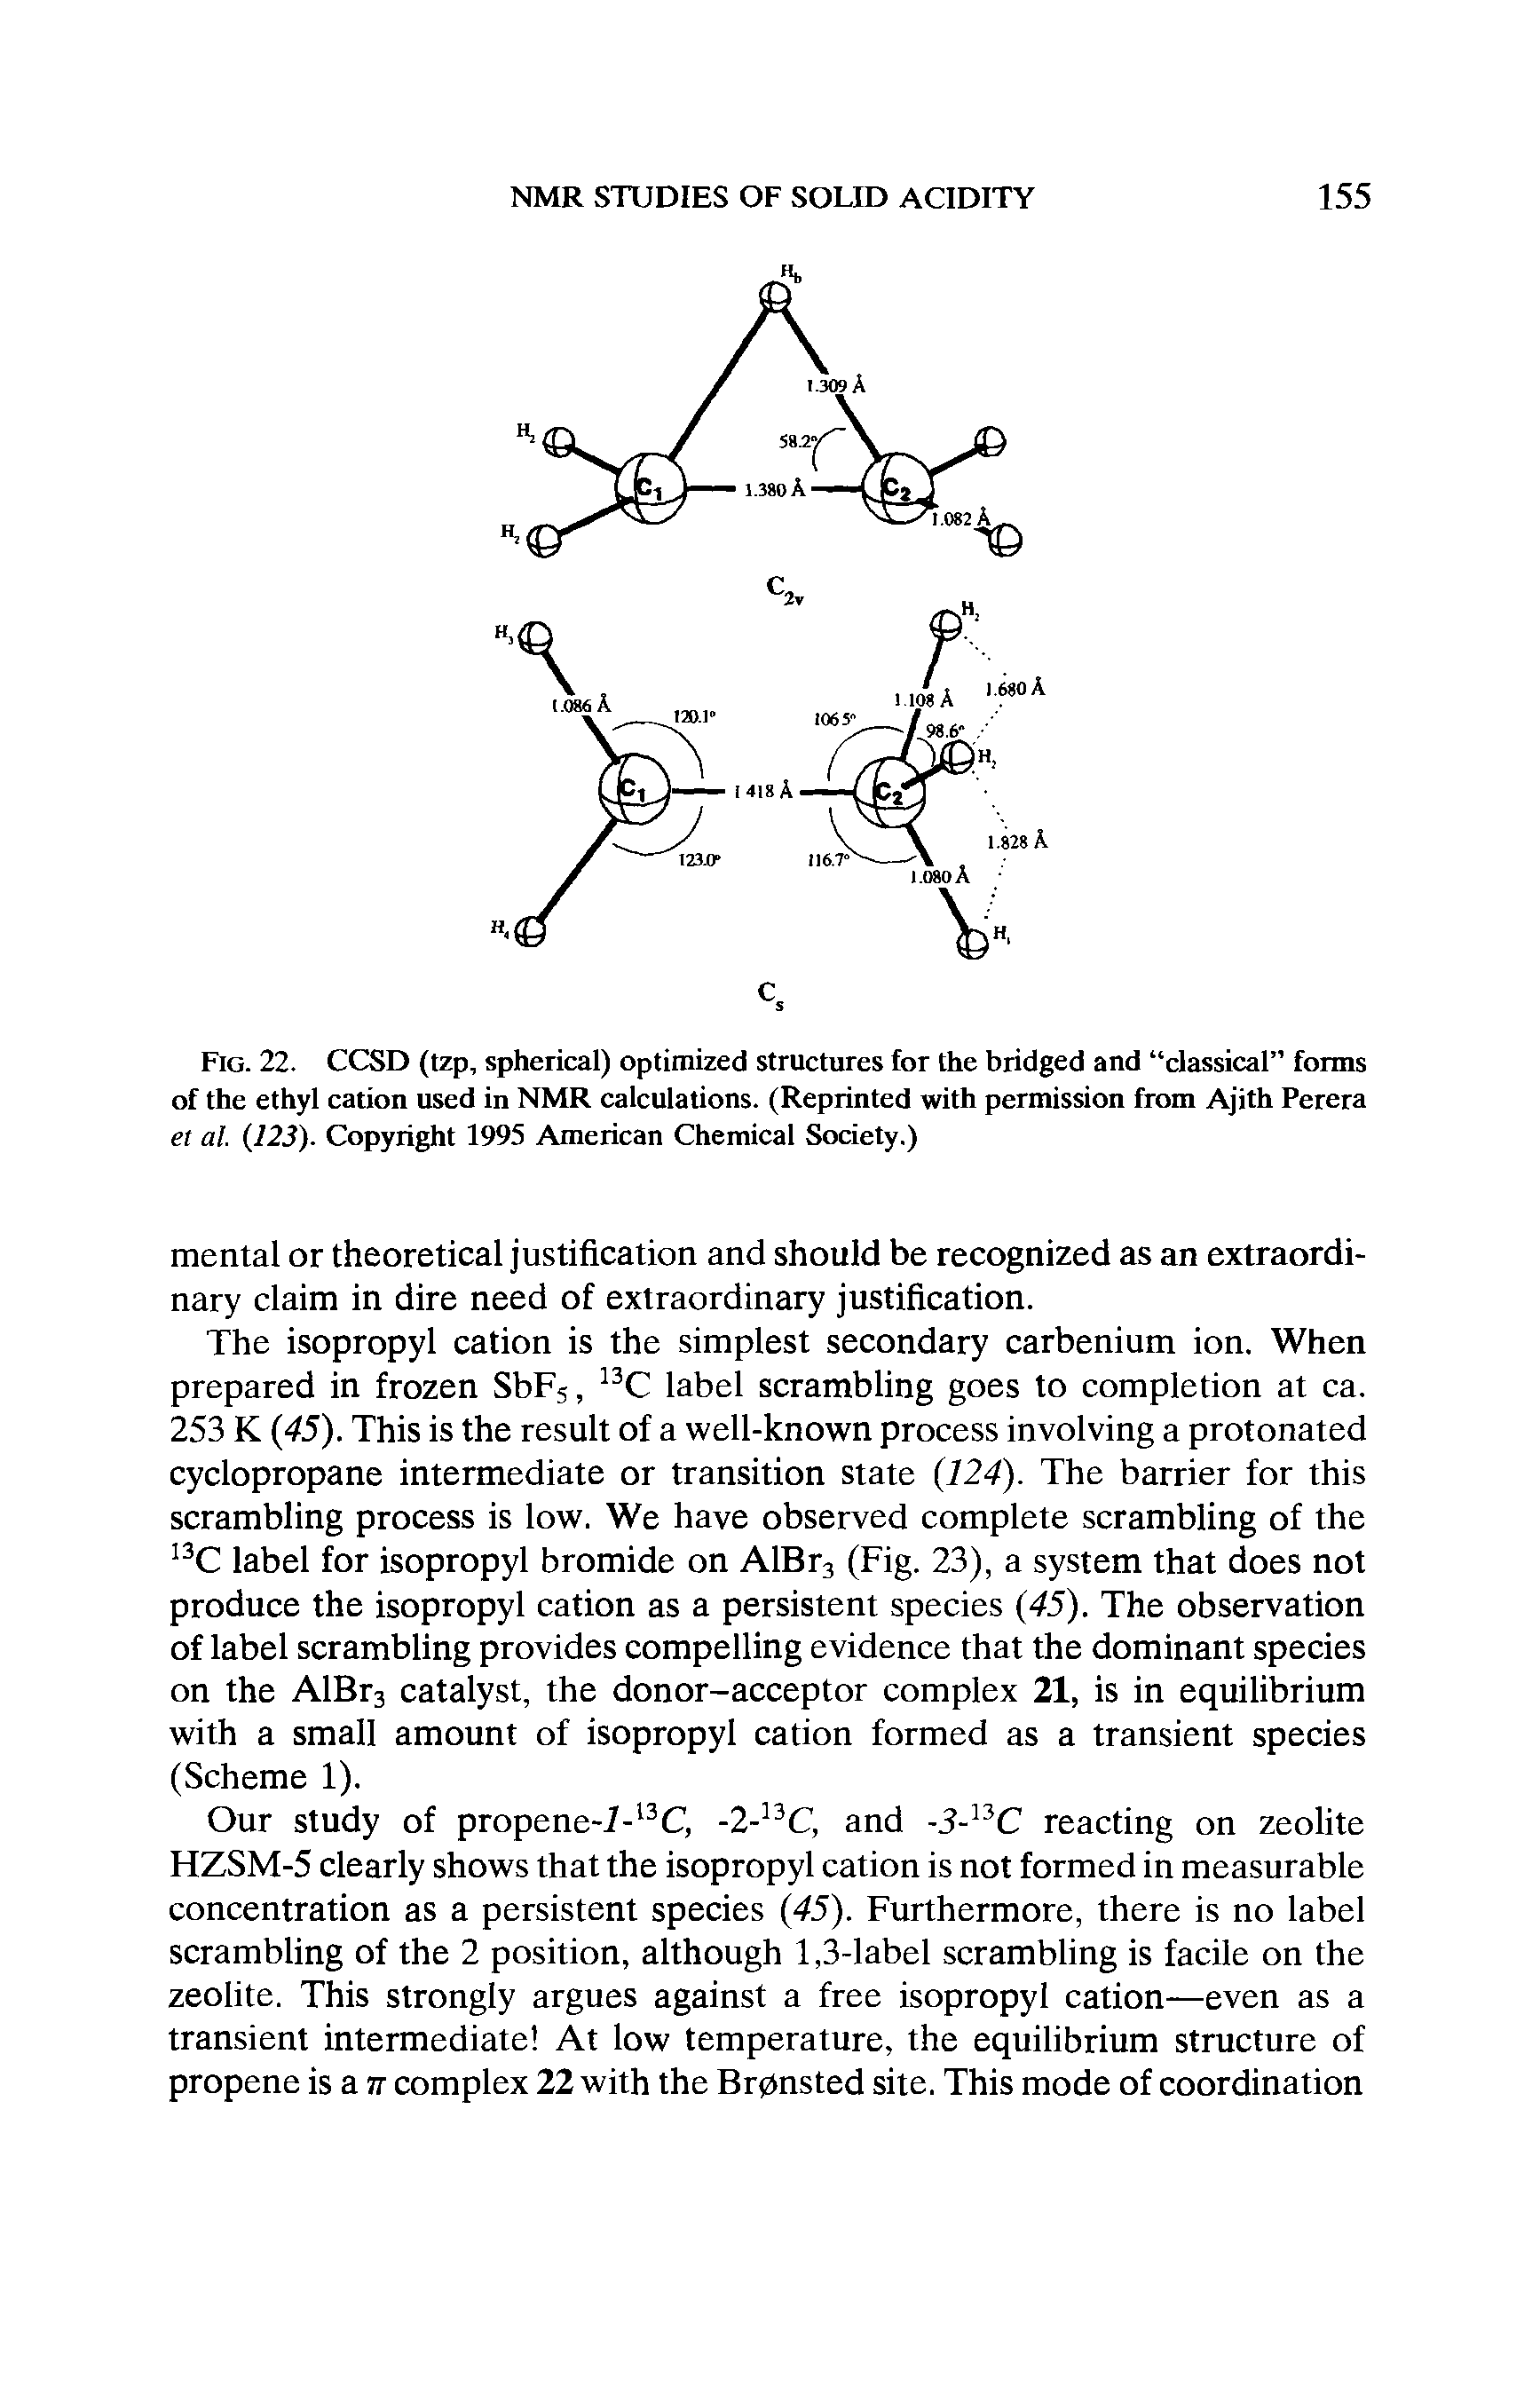 Fig. 22. CCSD (tzp, spherical) optimized structures for the bridged and classical forms of the ethyl cation used in NMR calculations. (Reprinted with permission from Ajith Perera et a . (123). Copyright 1995 American Chemical Society.)...